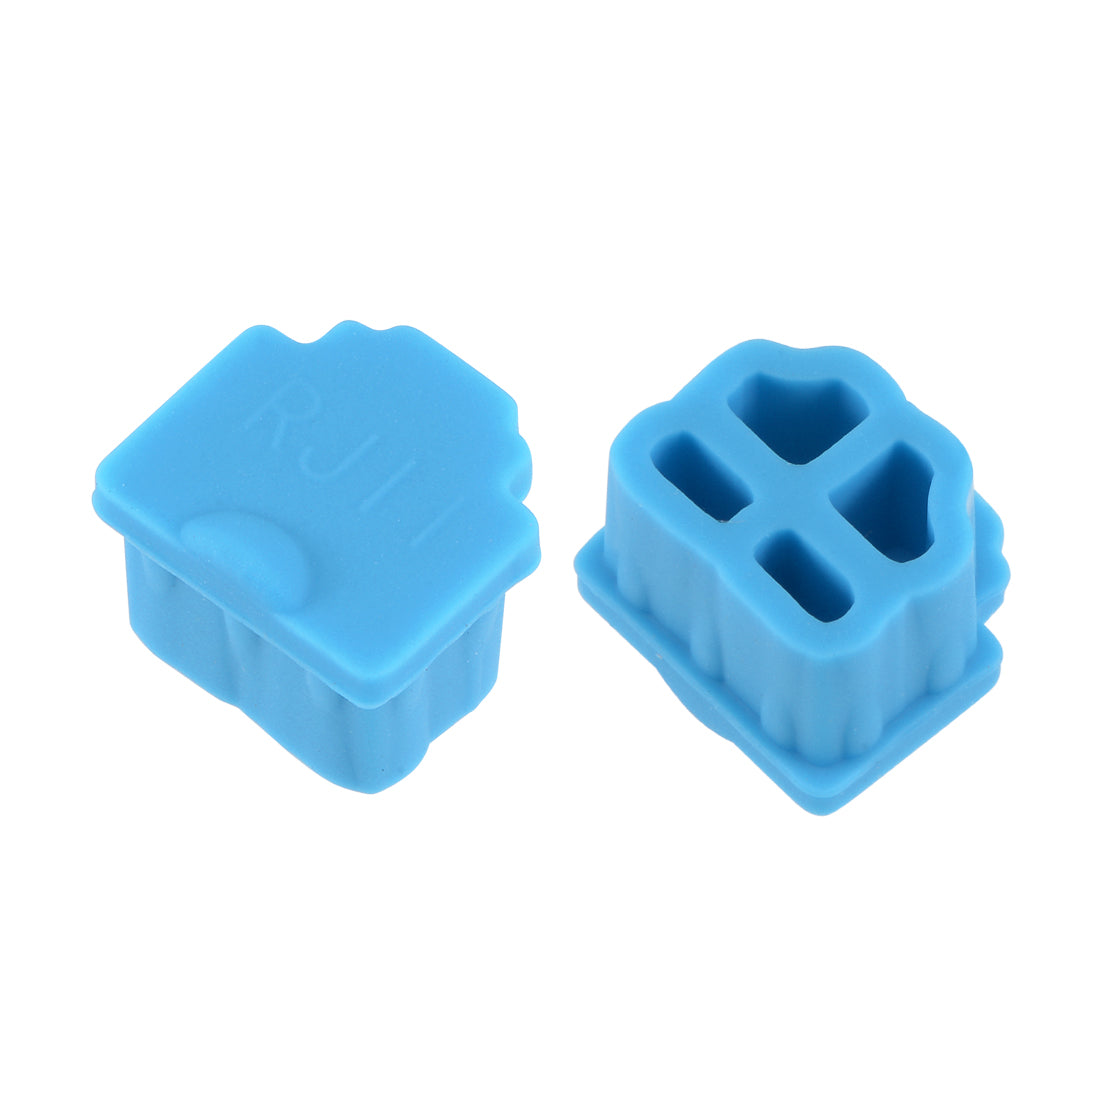 uxcell Uxcell 10pcs RJ11 Silicone Protector Telephone Modular Port Anti Dust Cap Cover, Blue